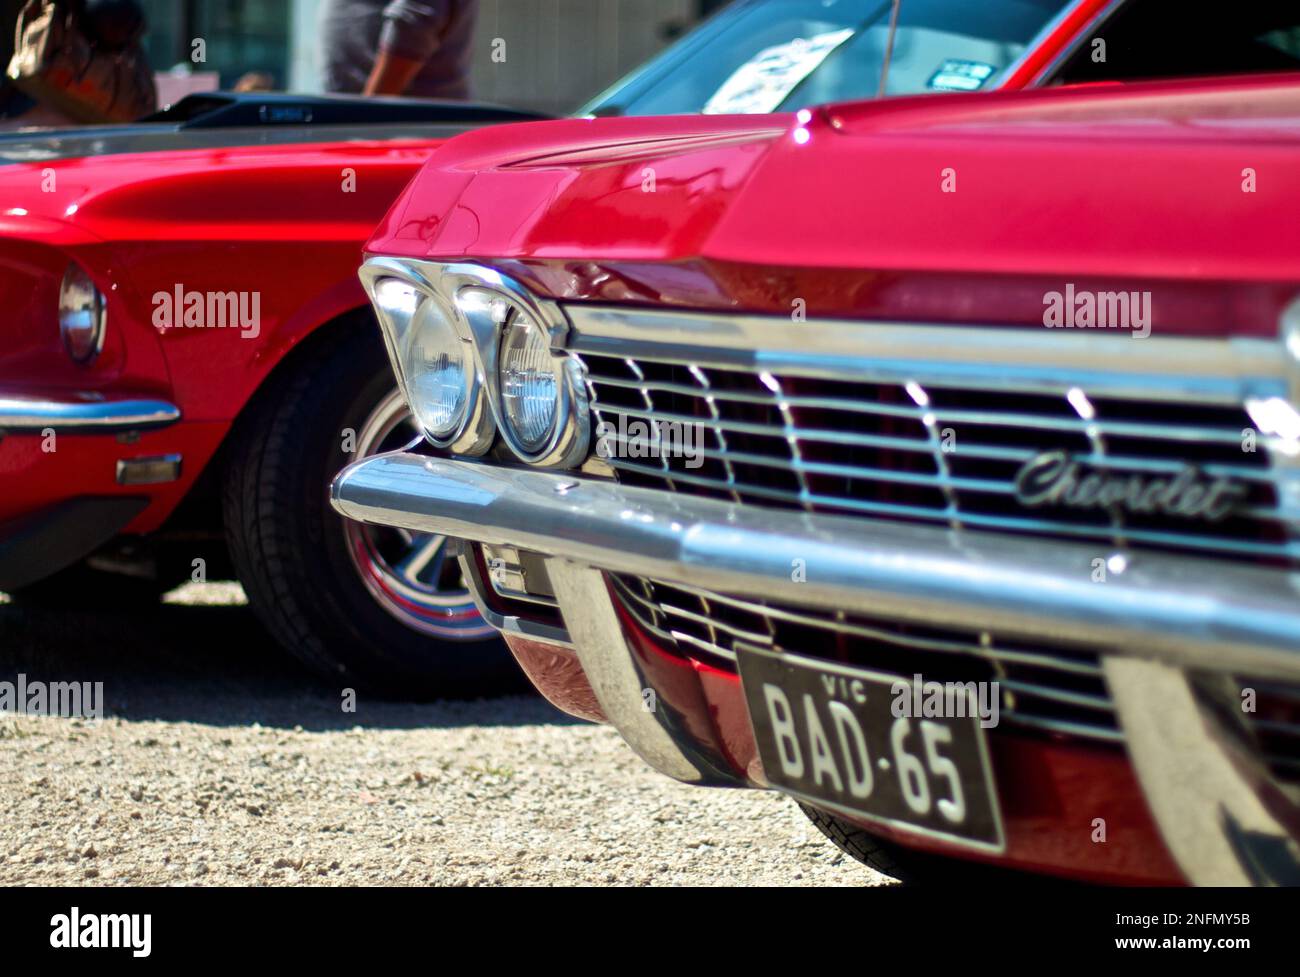 Red Chilli Chevrolet Impala Front-End View with Red and Black Ford Mustang in the Background Stock Photo